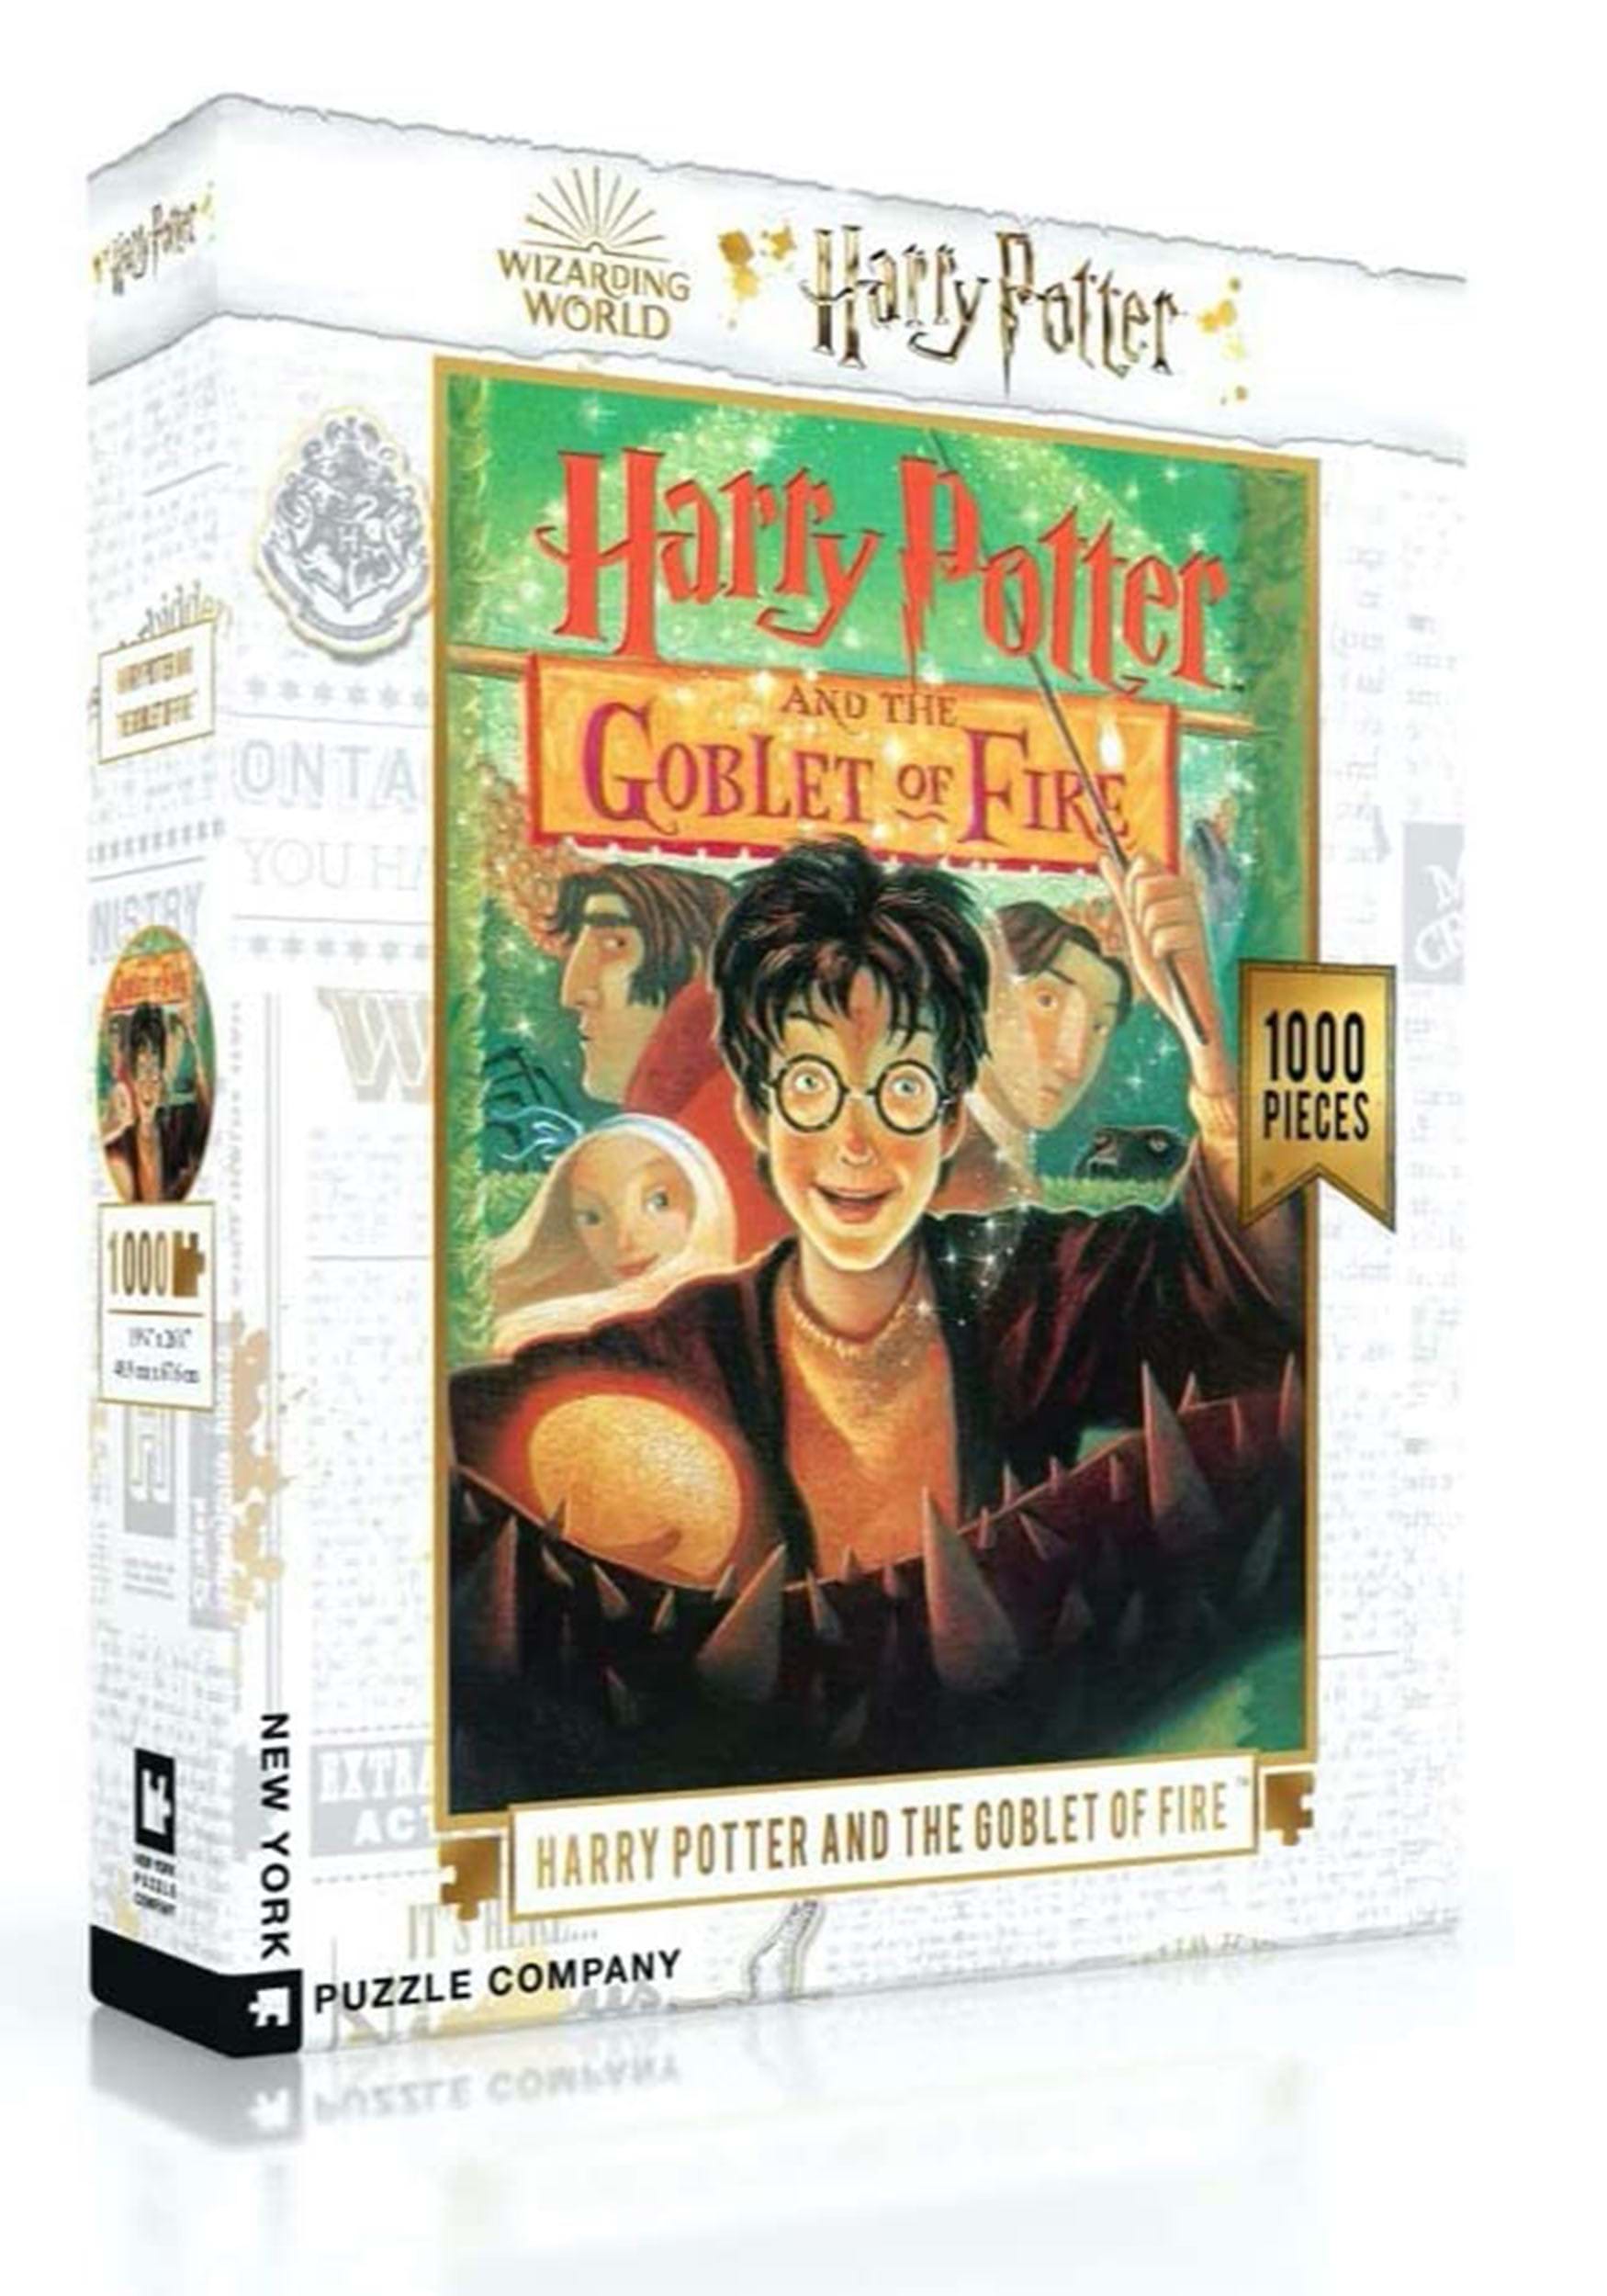 1000 pc Harry Potter and the Goblet of Fire Jigsaw Puzzle